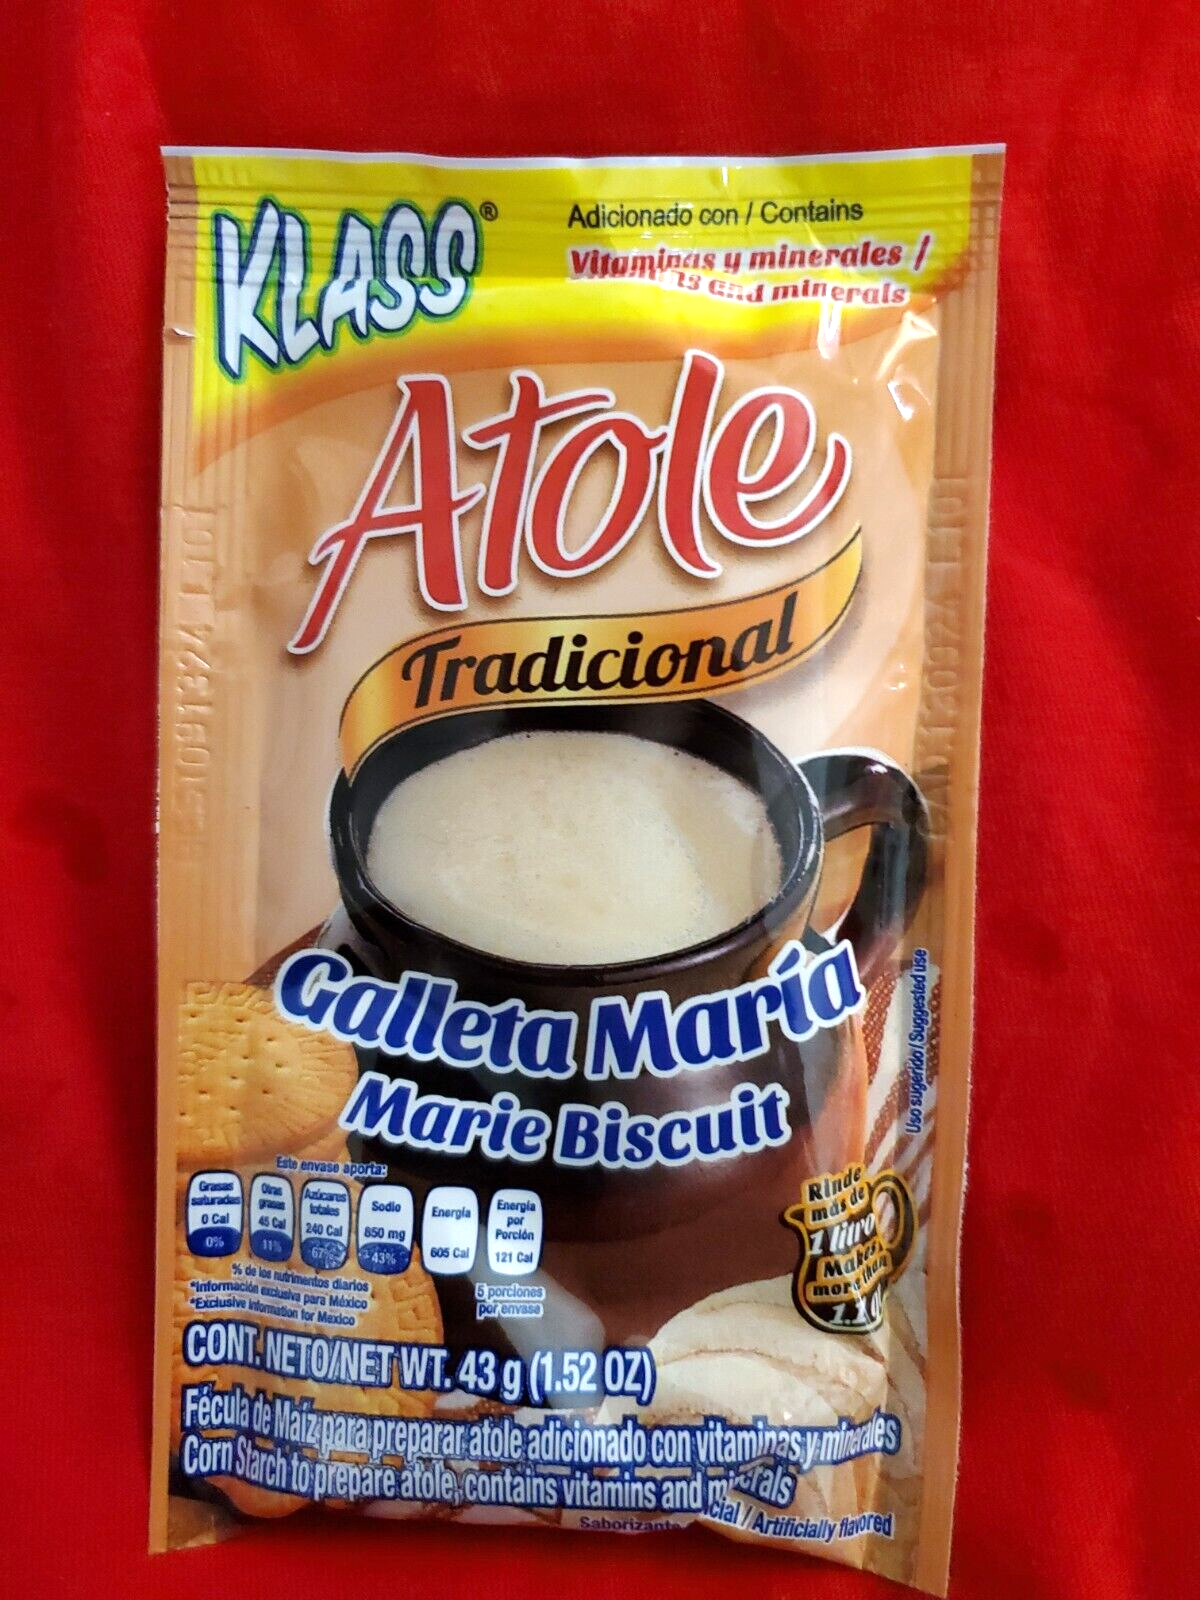 12 PACK KLASS ATOLE  TRADITIONAL MARIE BISCUIT/ ATOLE TRADICIONAL GALLETA MARIA - $25.25